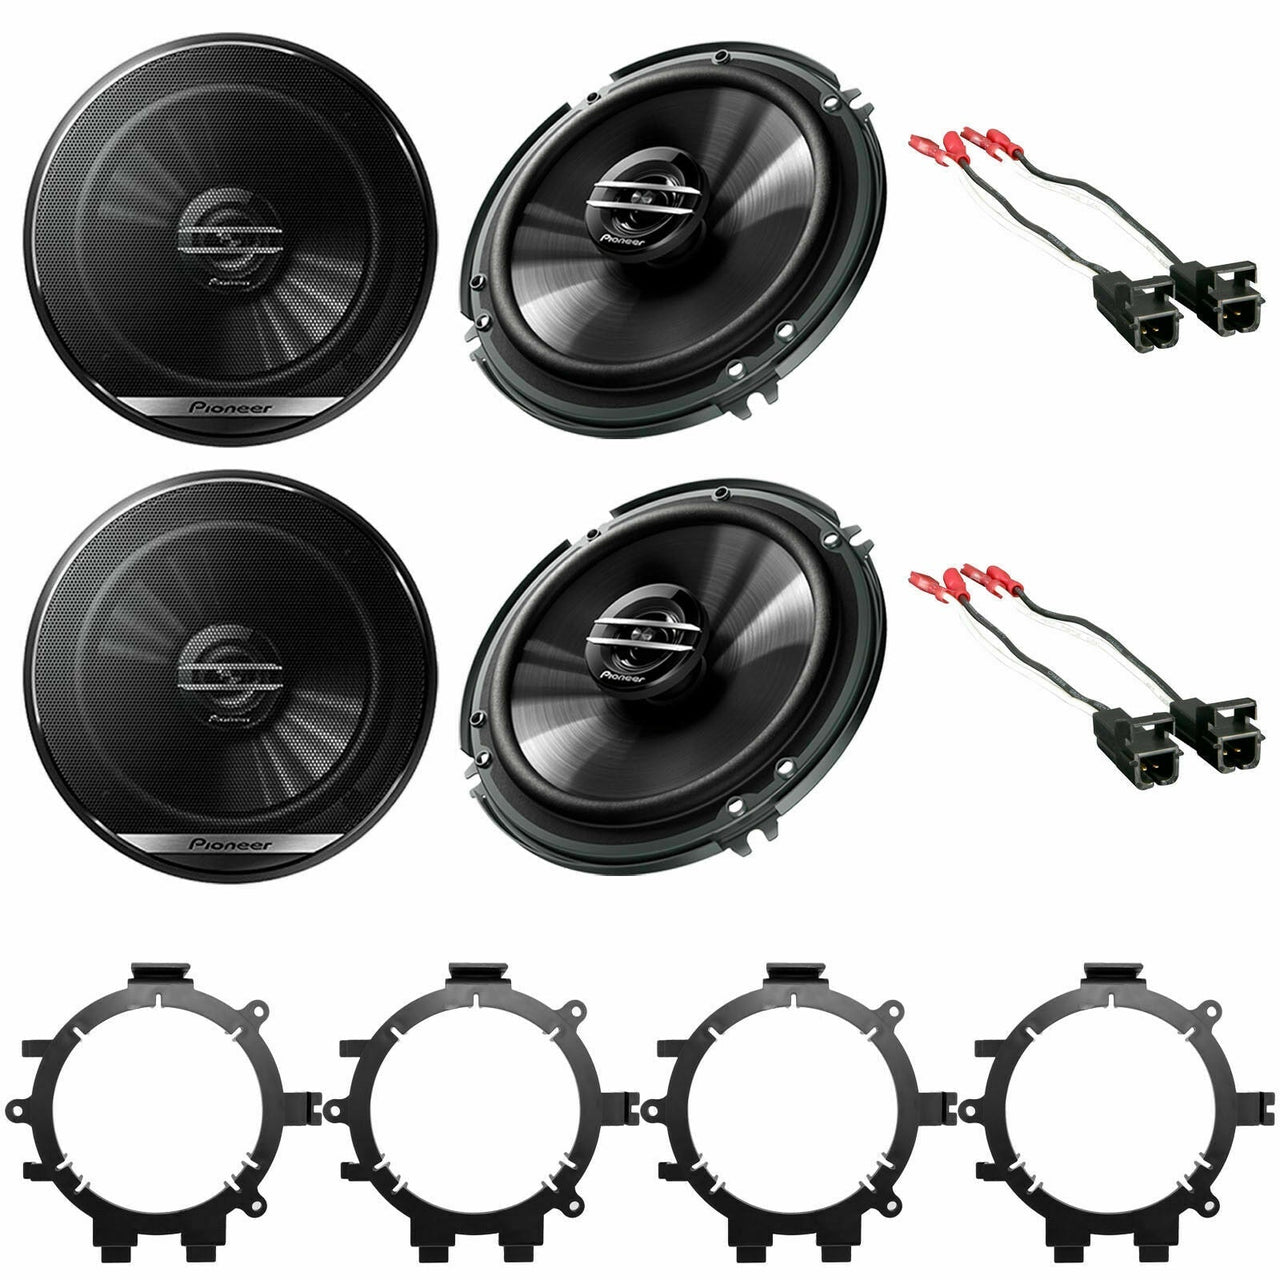 Pioneer 6.5" Car Audio Stereo Front & Rear Speakers W/Mounting Bracket & Harness